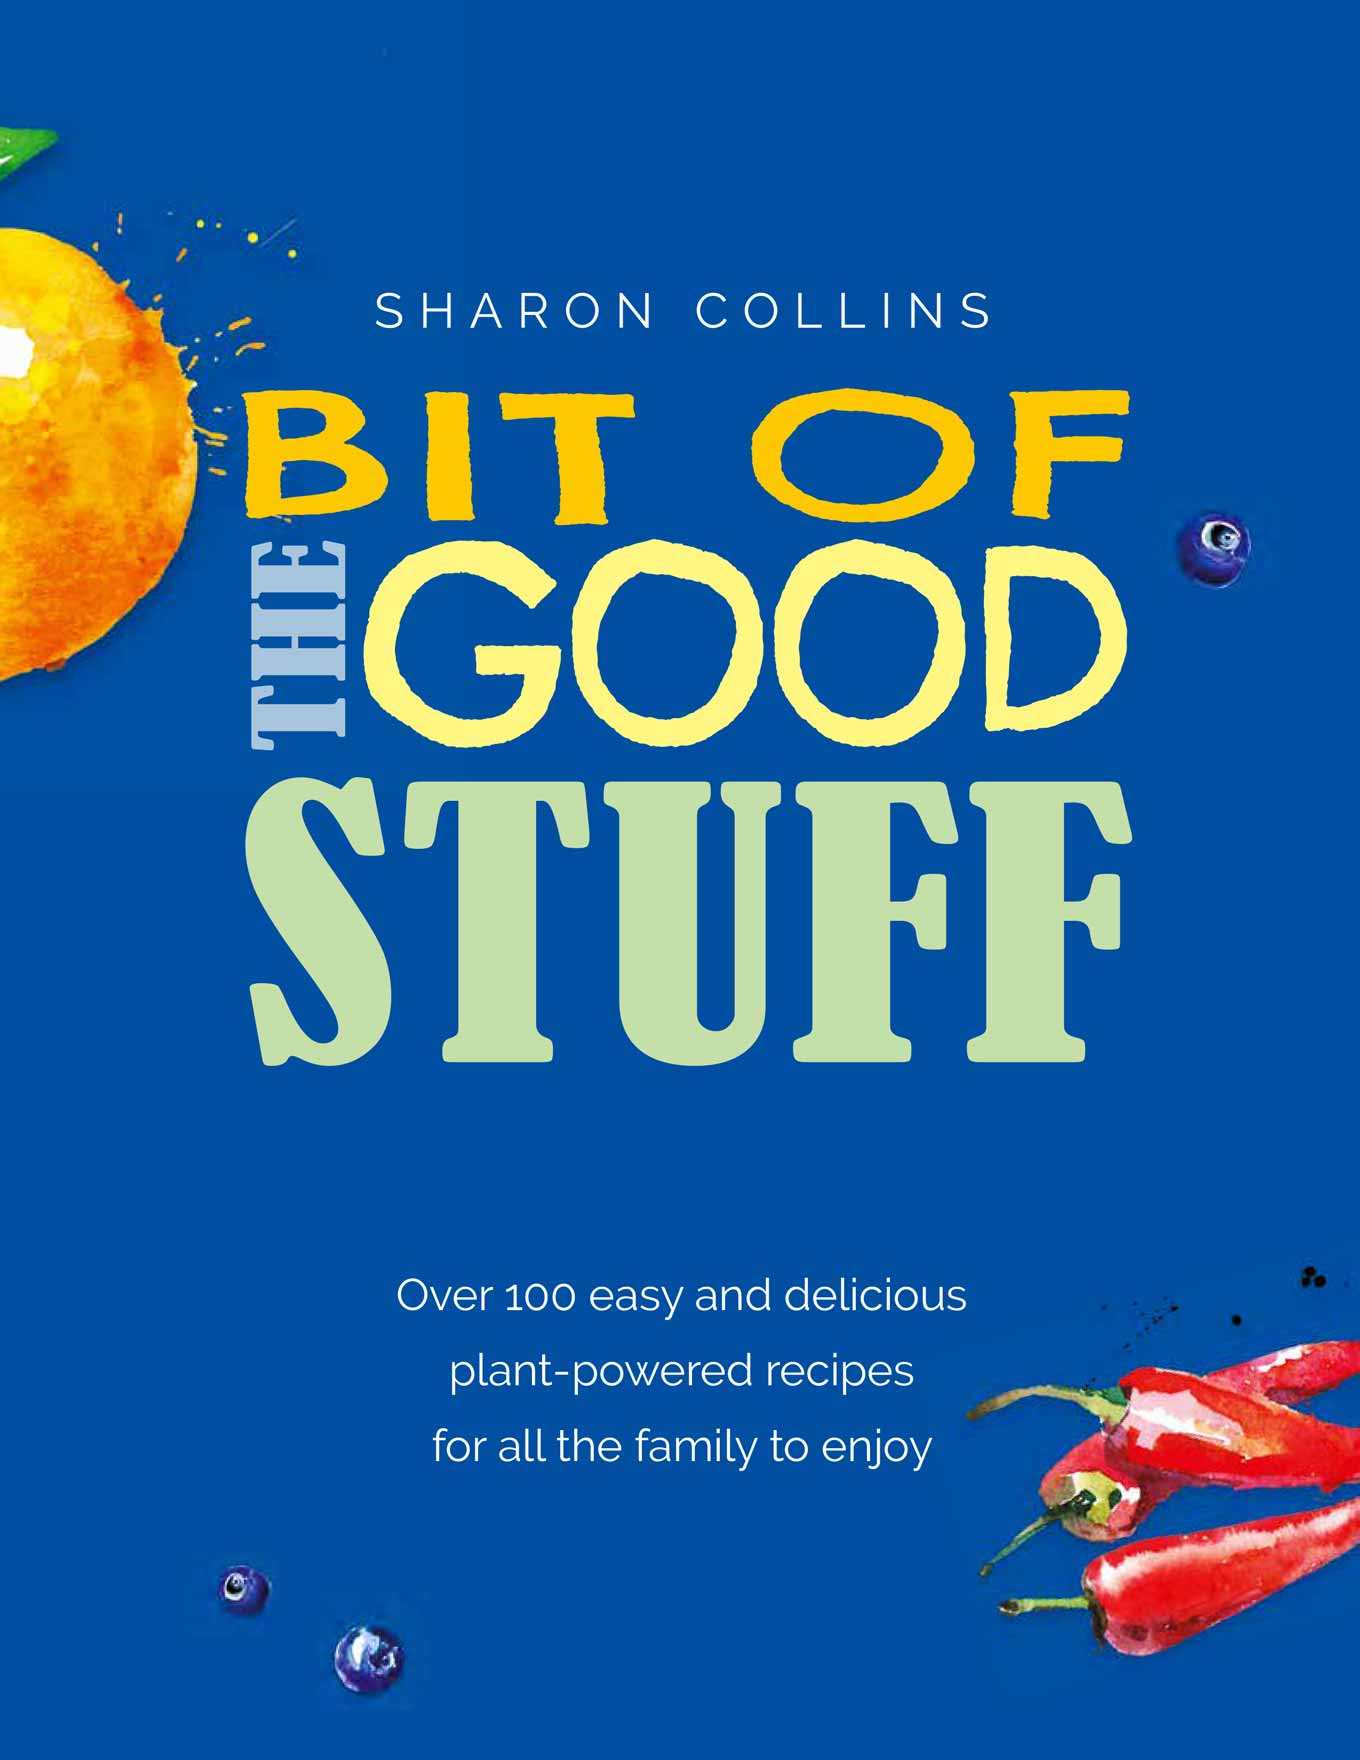 Bit of the good stuff book cover.